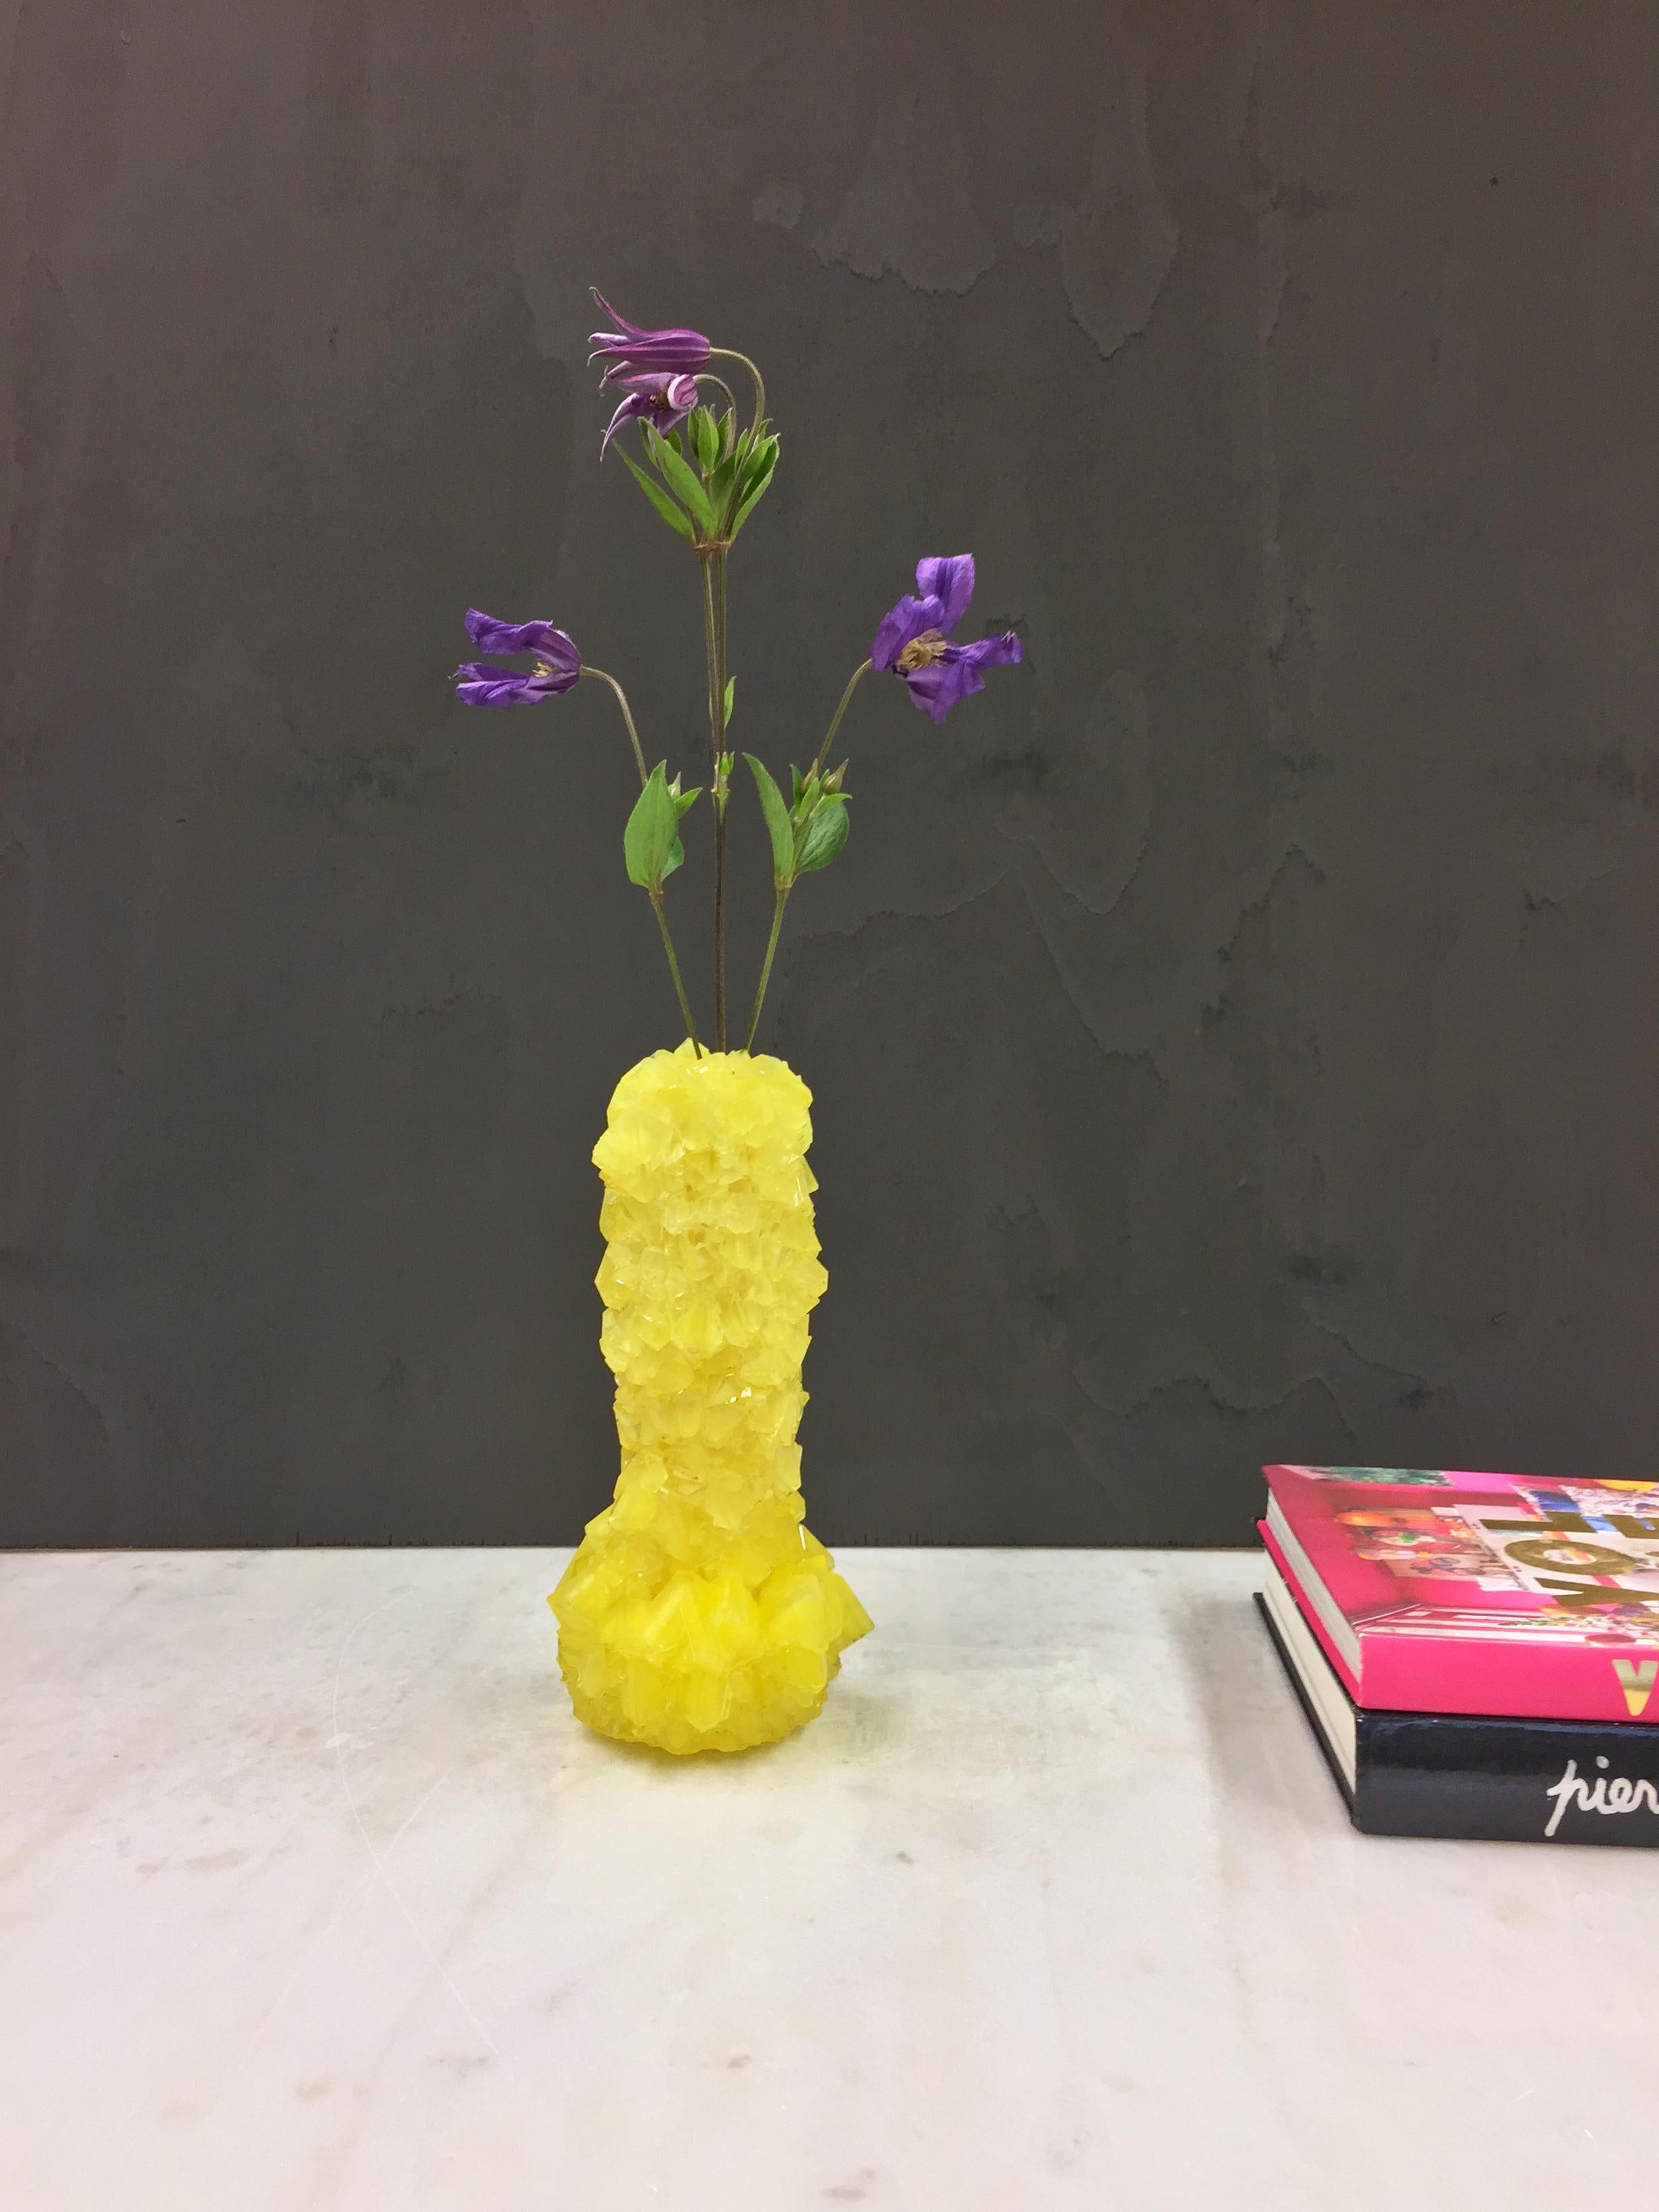 Crystallized vase. 
 
Measures: Height 26 cm
Diameter 10 cm
Weight 17 kg.

The ‘Crystal’ series is the result of research into stalagmites, one of the greatest wonders of nature. The growing process of the objects can be seen as a metaphor for